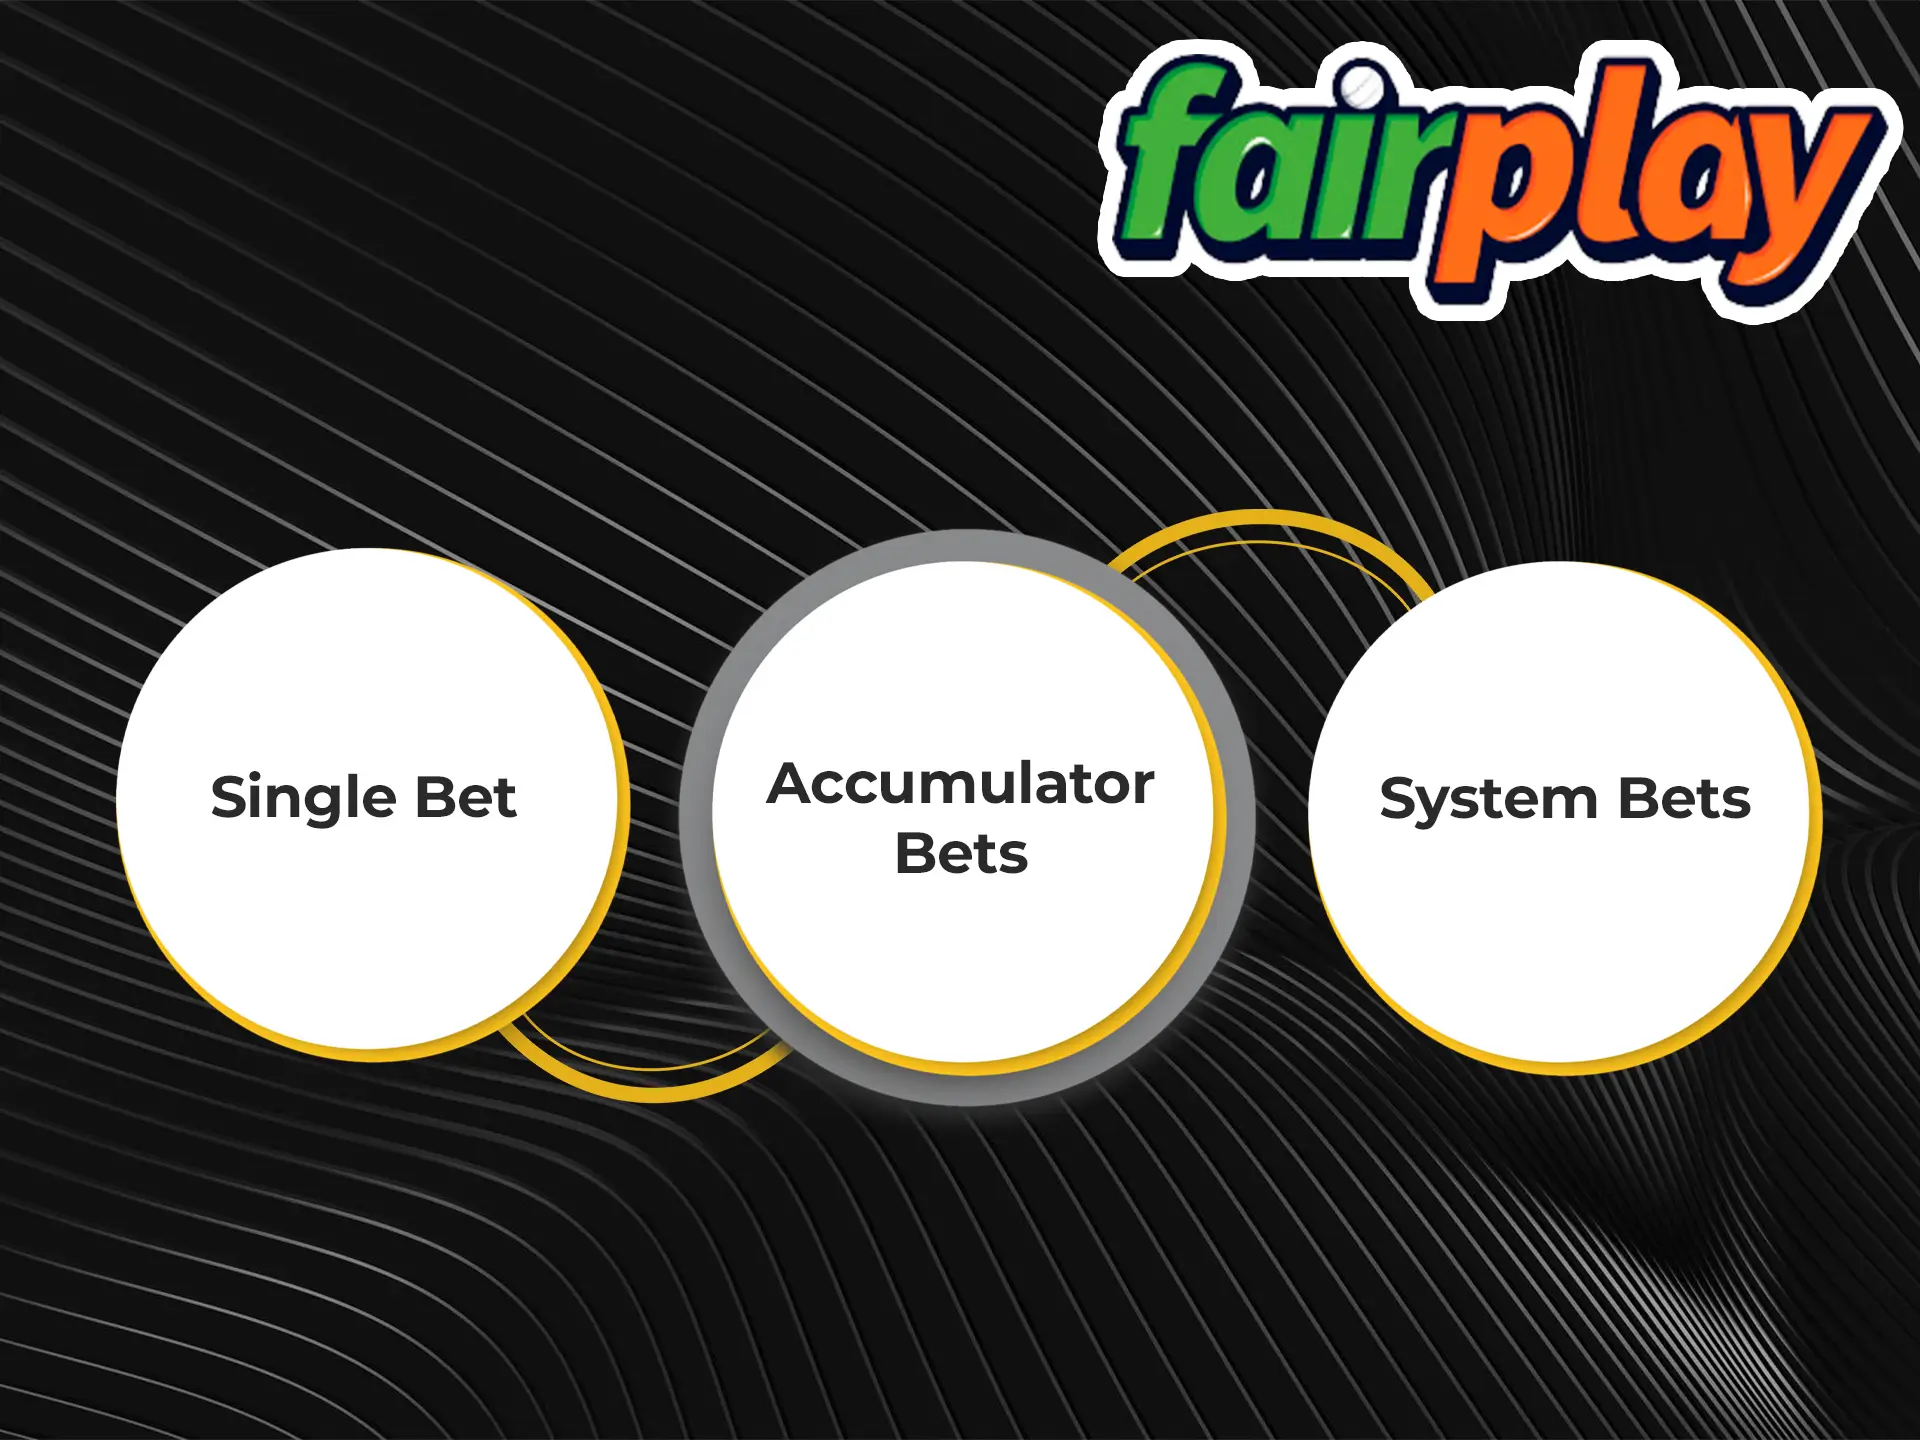 Decide on the type of bet as this plays an important role at Fairplay Bookmaker.